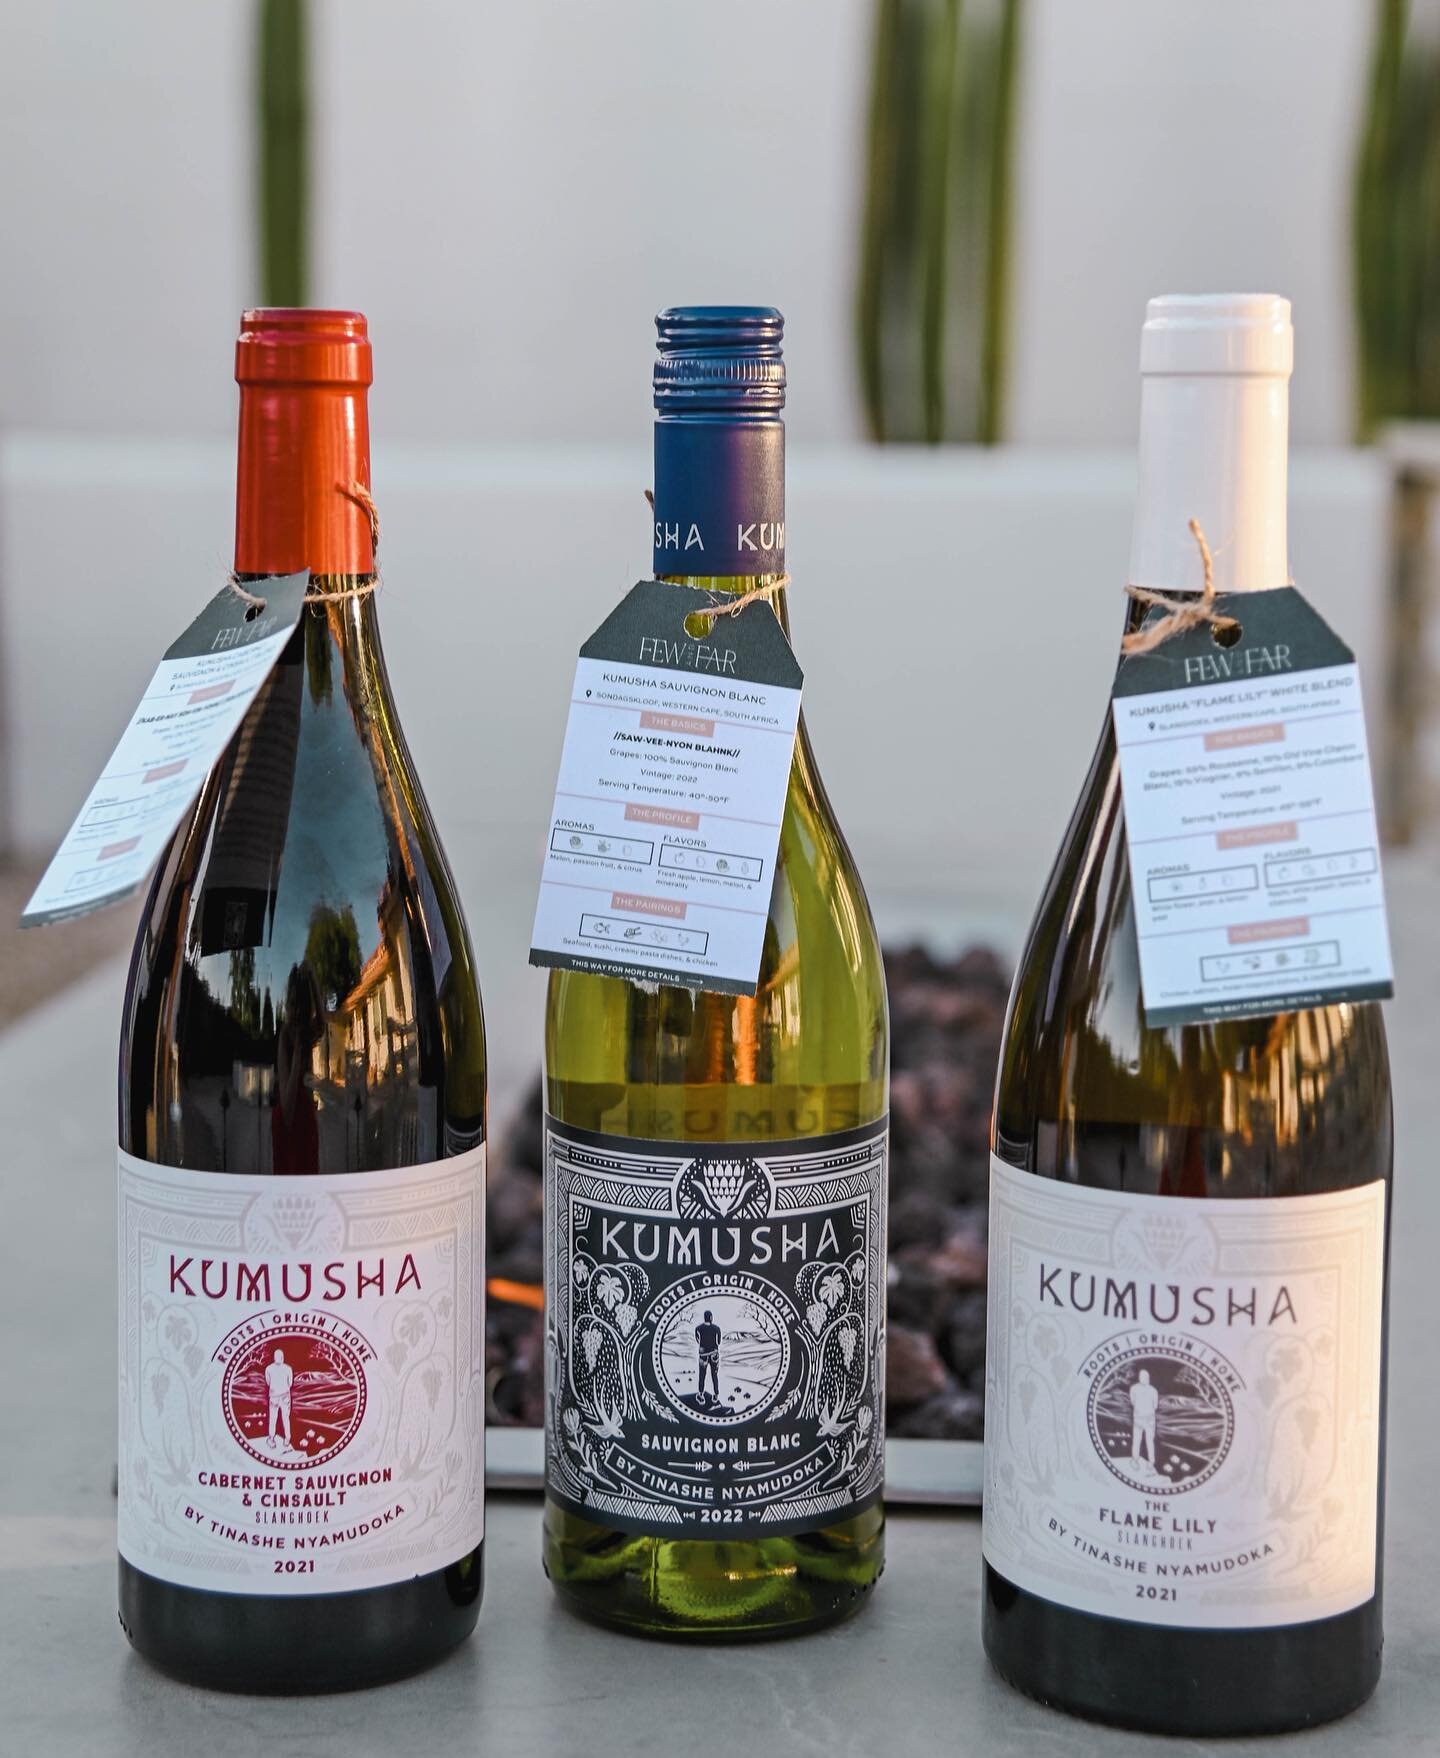 Looking to expand your palate and taste more wine from lesser known regions? Look no further, we source wines from around the world for the Few &amp; Far shop and club, and our most recent additions are a limited release of wines from South Africa&rs